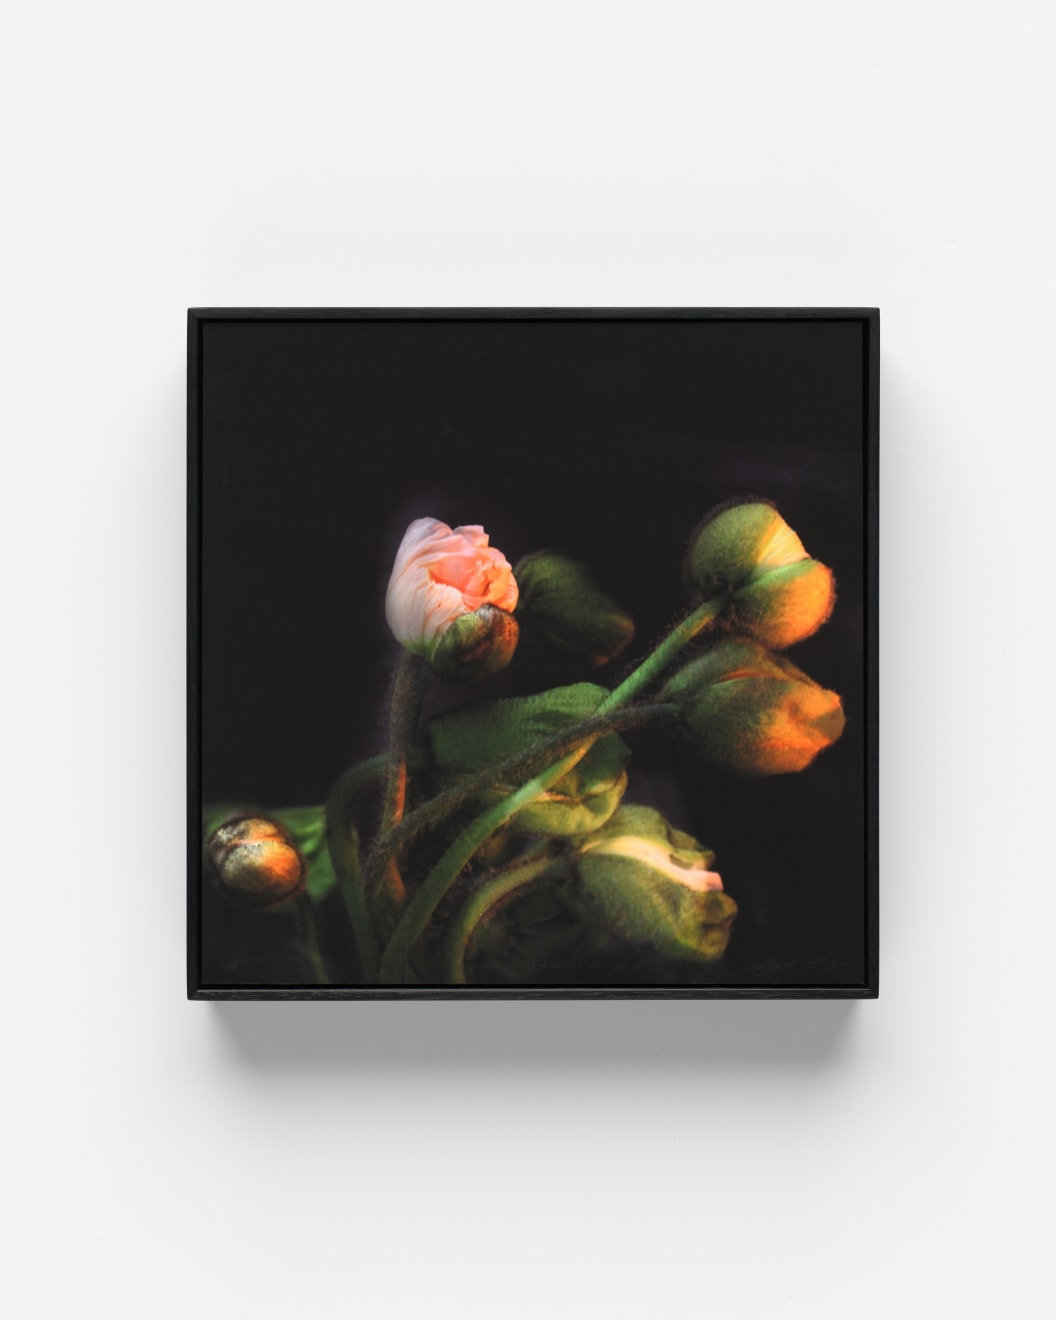 Sophia Szilagyi Many Marvellous Things Archival Pigment Print Black Shadow Box Frame 30 x 30 cm Limited Edition 6 AUD $1000 GBP £495 SOLD (Edition #1, #2, #3)